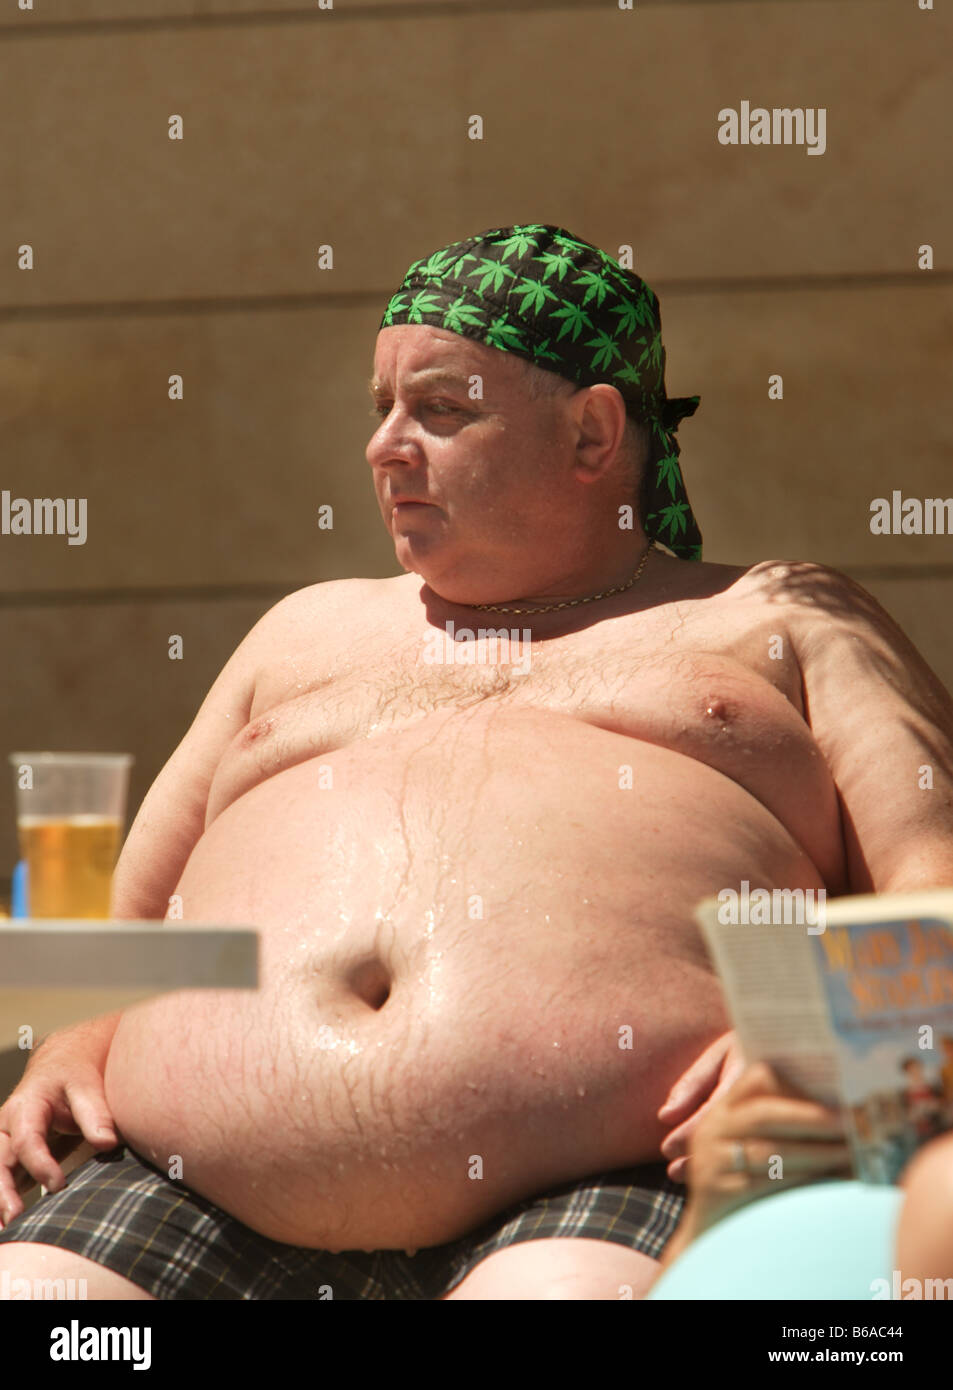 https://c8.alamy.com/comp/B6AC44/fat-man-with-huge-fat-belly-and-deep-belly-button-sweating-while-sitting-B6AC44.jpg